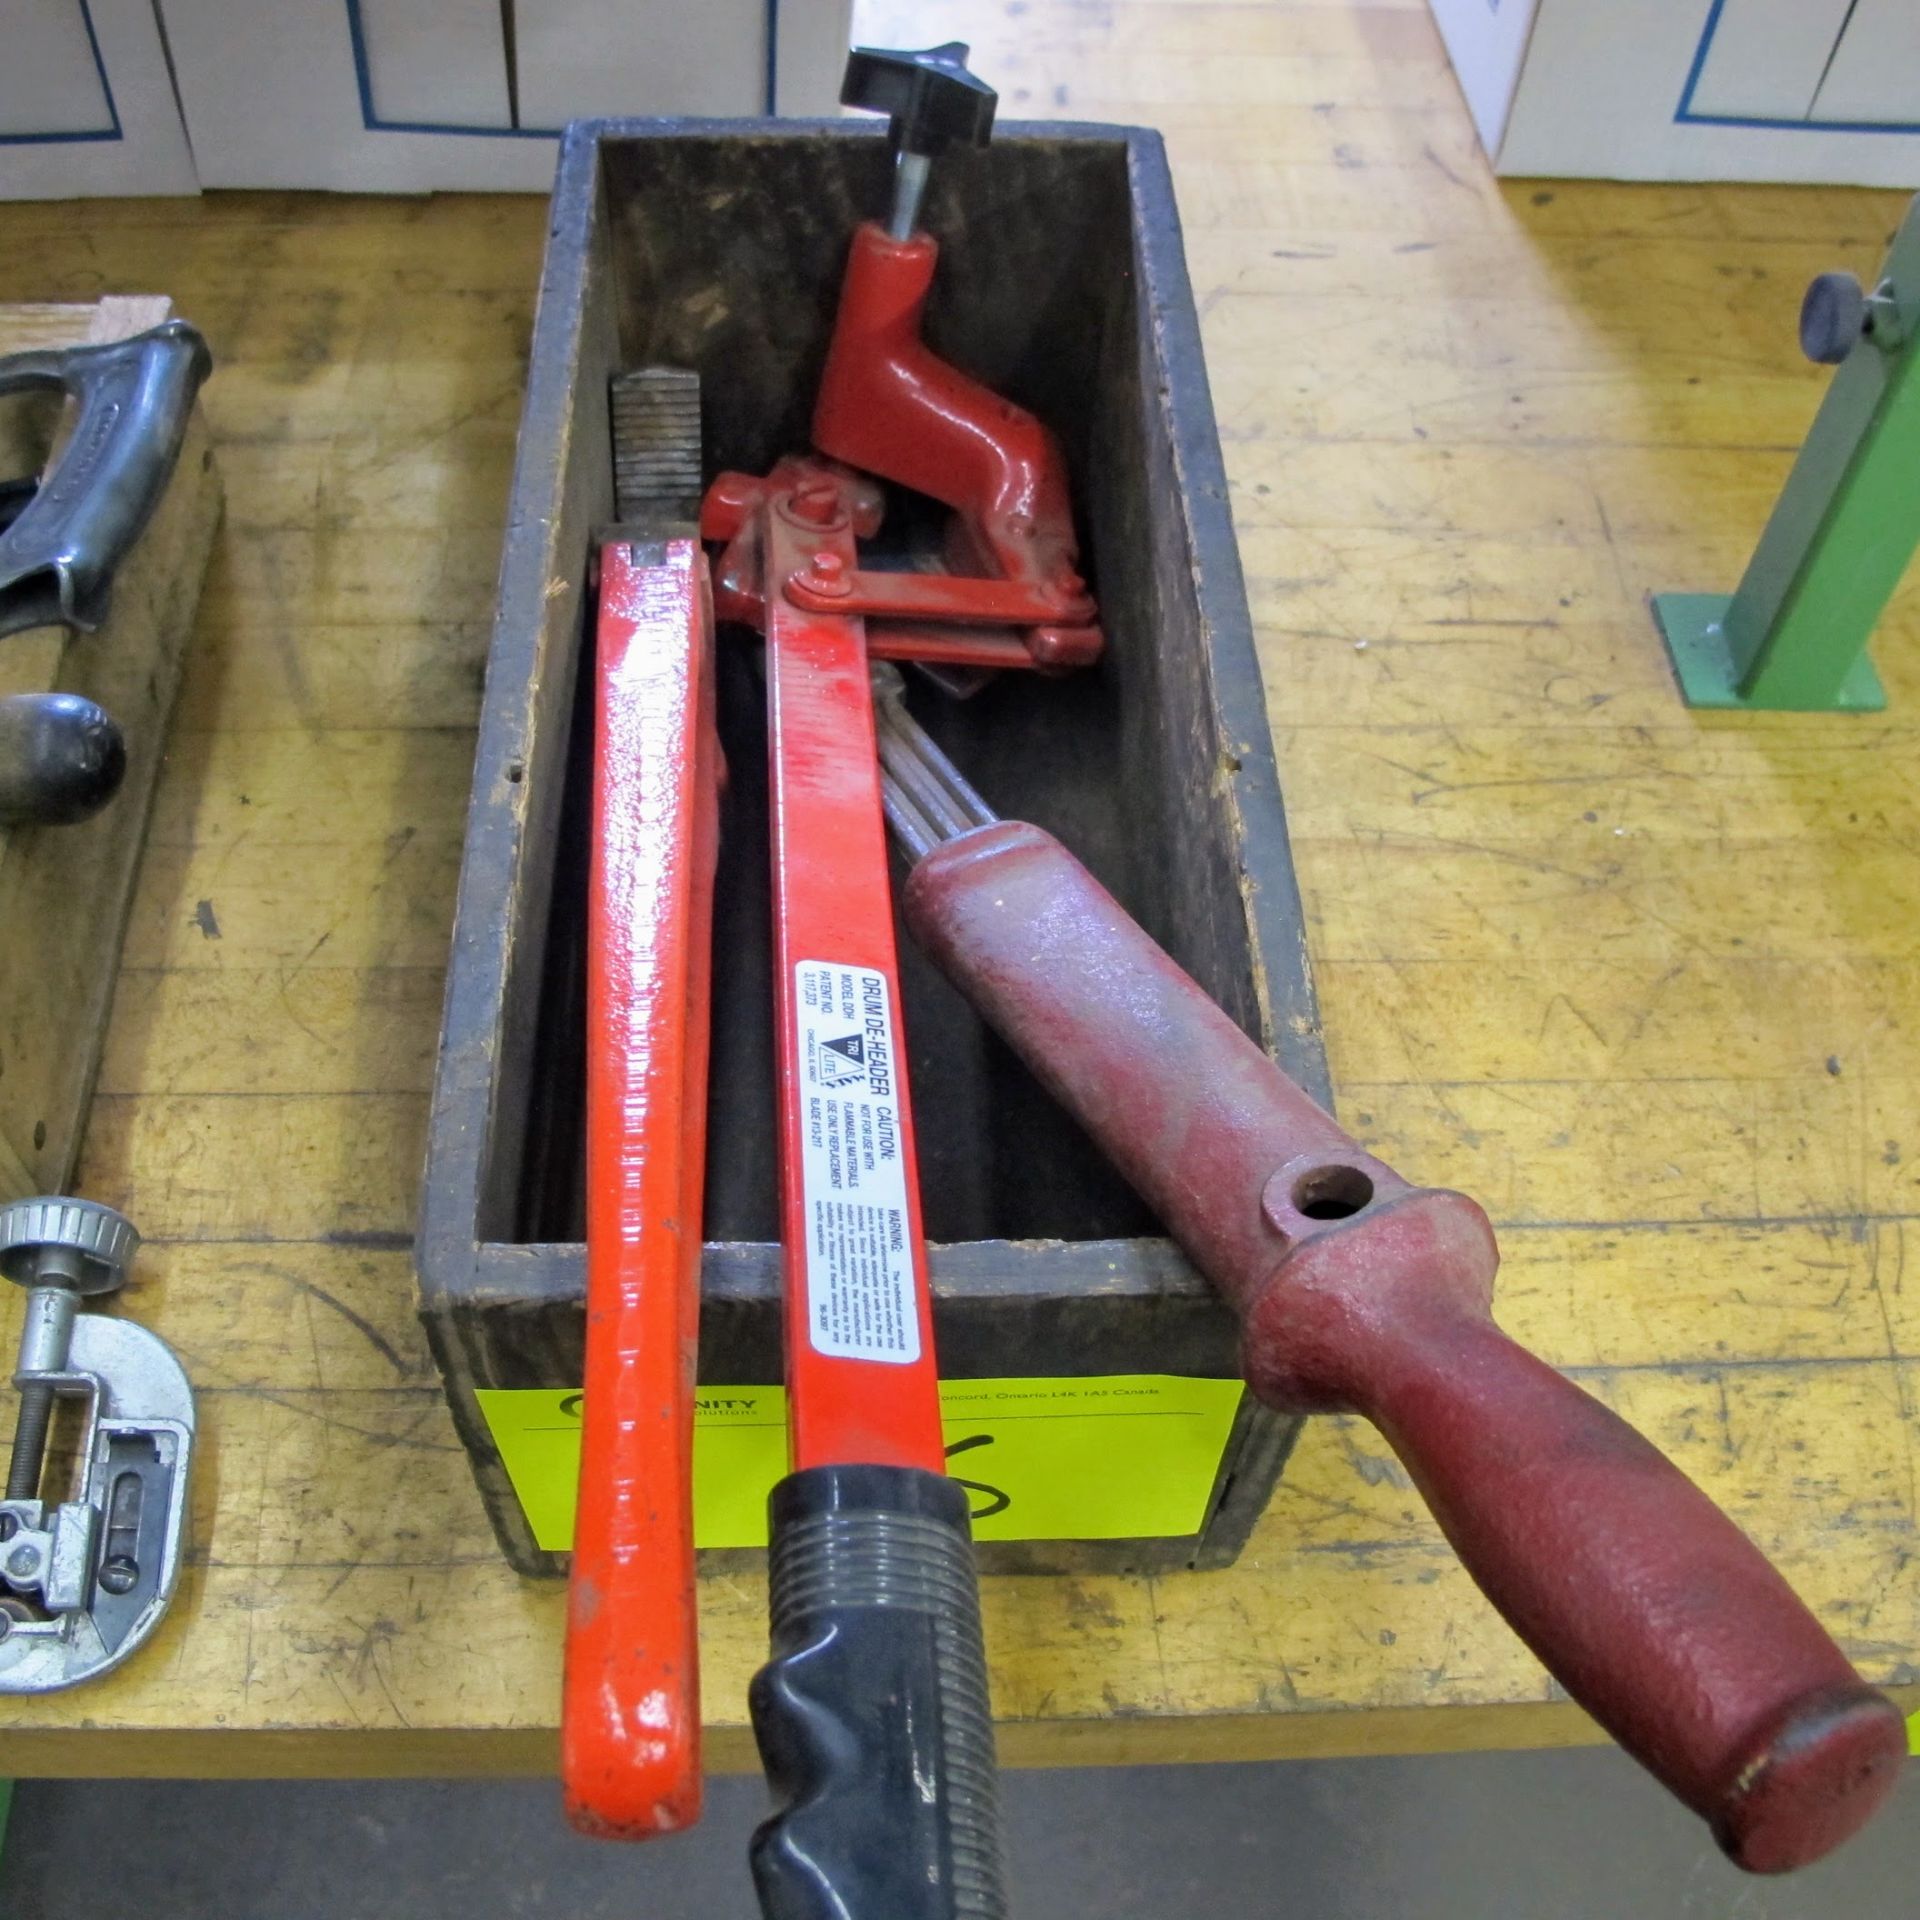 LOT OF 3 WOOD CRATES W/HAND TOOLS, PIPE CUTTERS, SAWS, PIPE WRENCH, HAMMERS, FILES, DRIVERS, ETC - Image 4 of 4